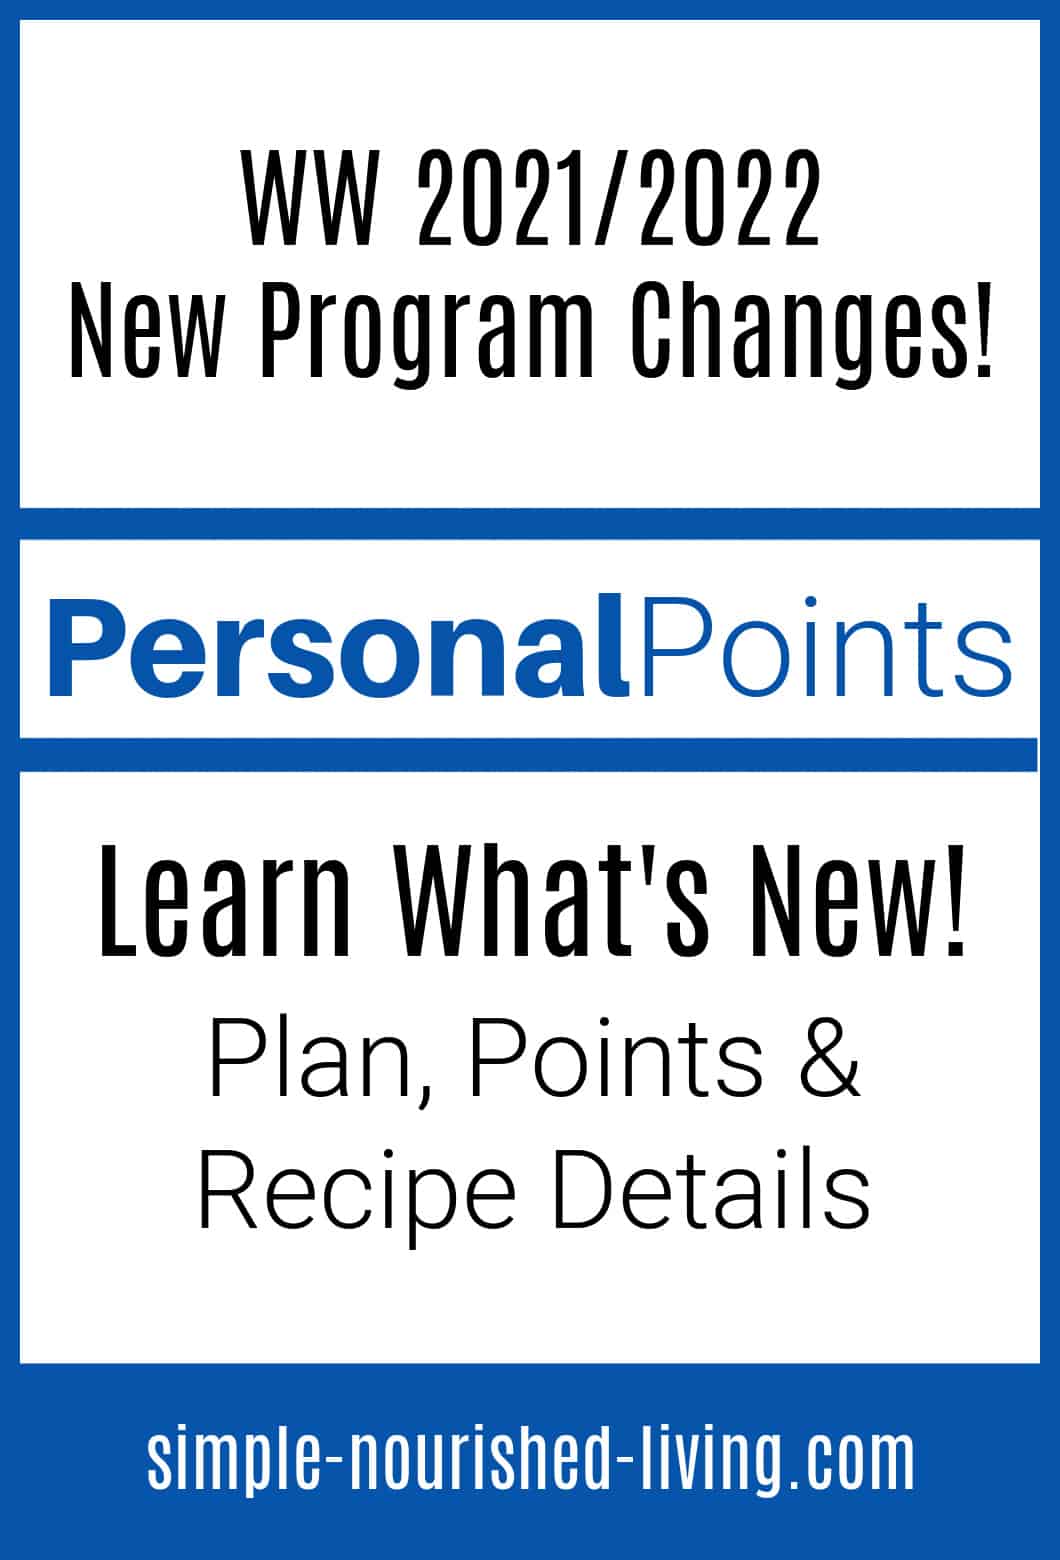 Banner for WW new PersonalPoints program changes for 2022.